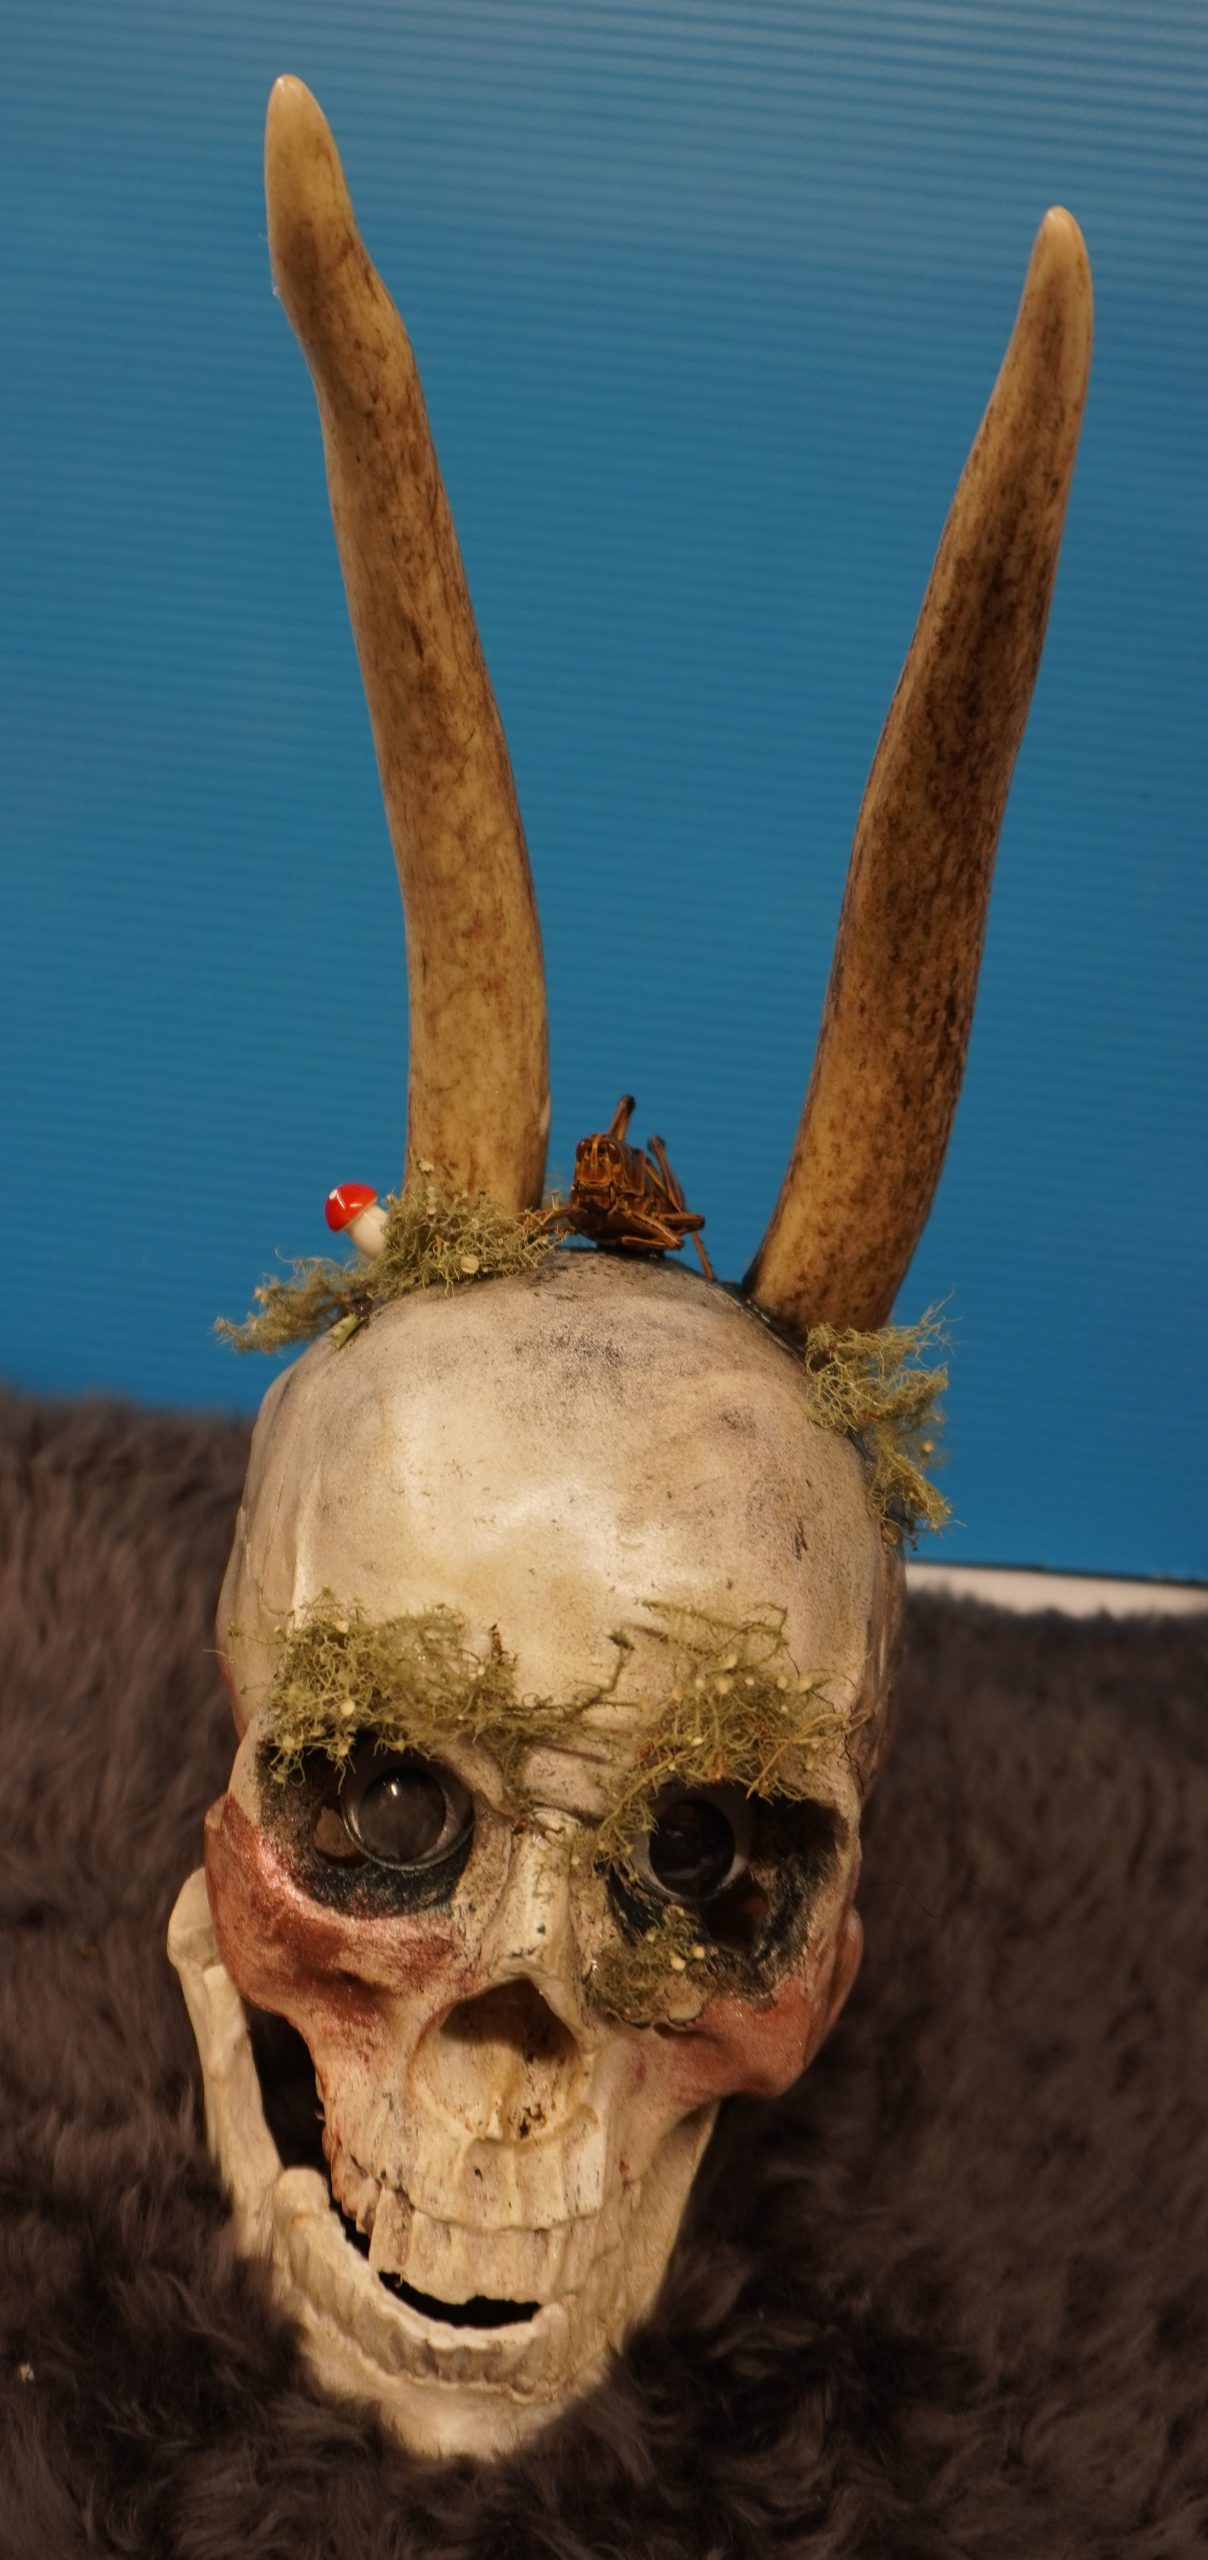 Halloween skull with antlers